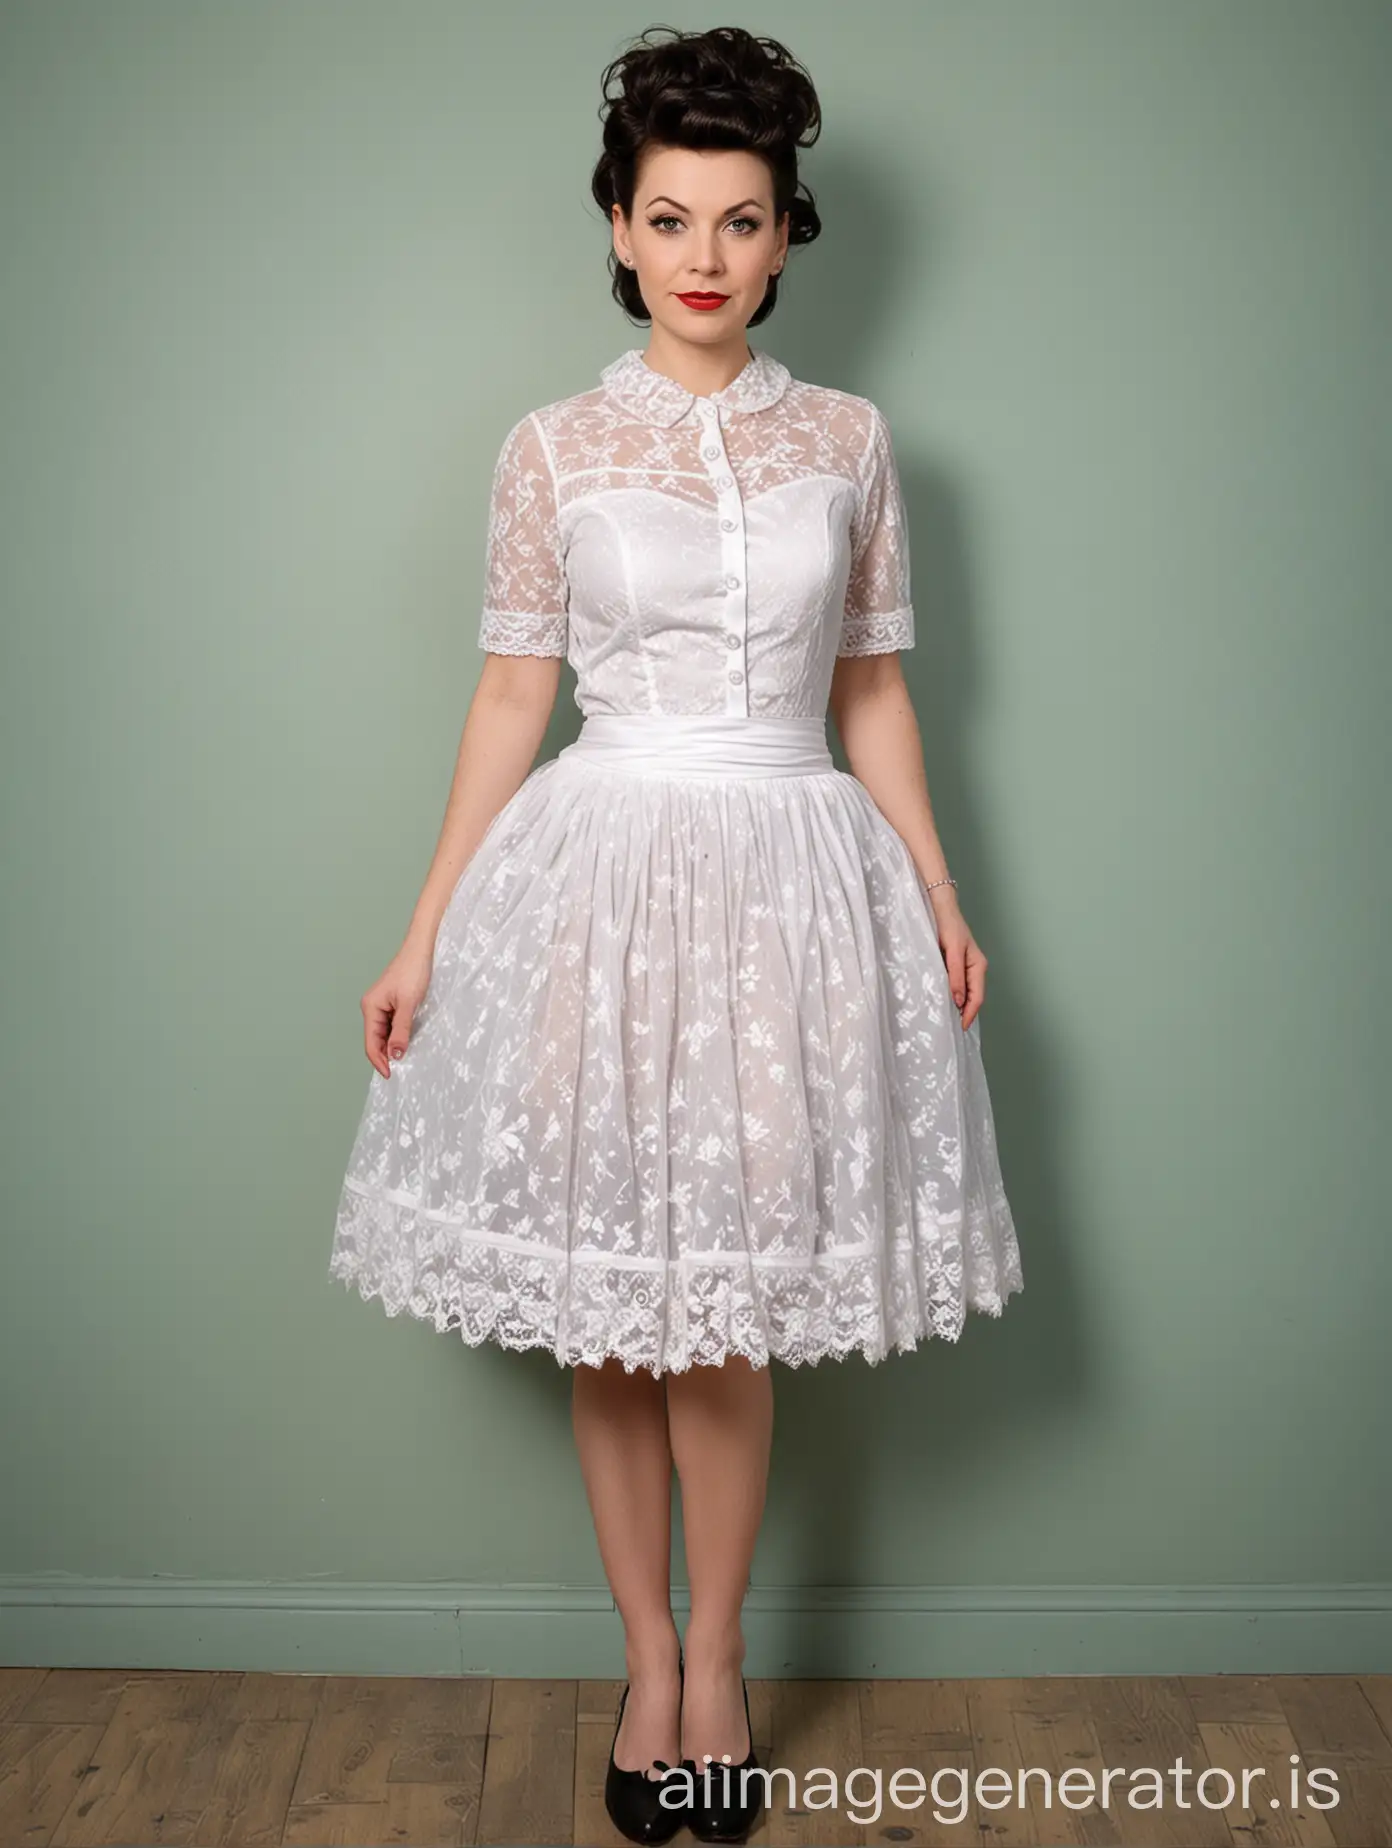 tea-length rockabilly-style fifties bouffante white lace bouffant petticoat, worn by a 35-year-old lady with bouffante hair in the dressing room.